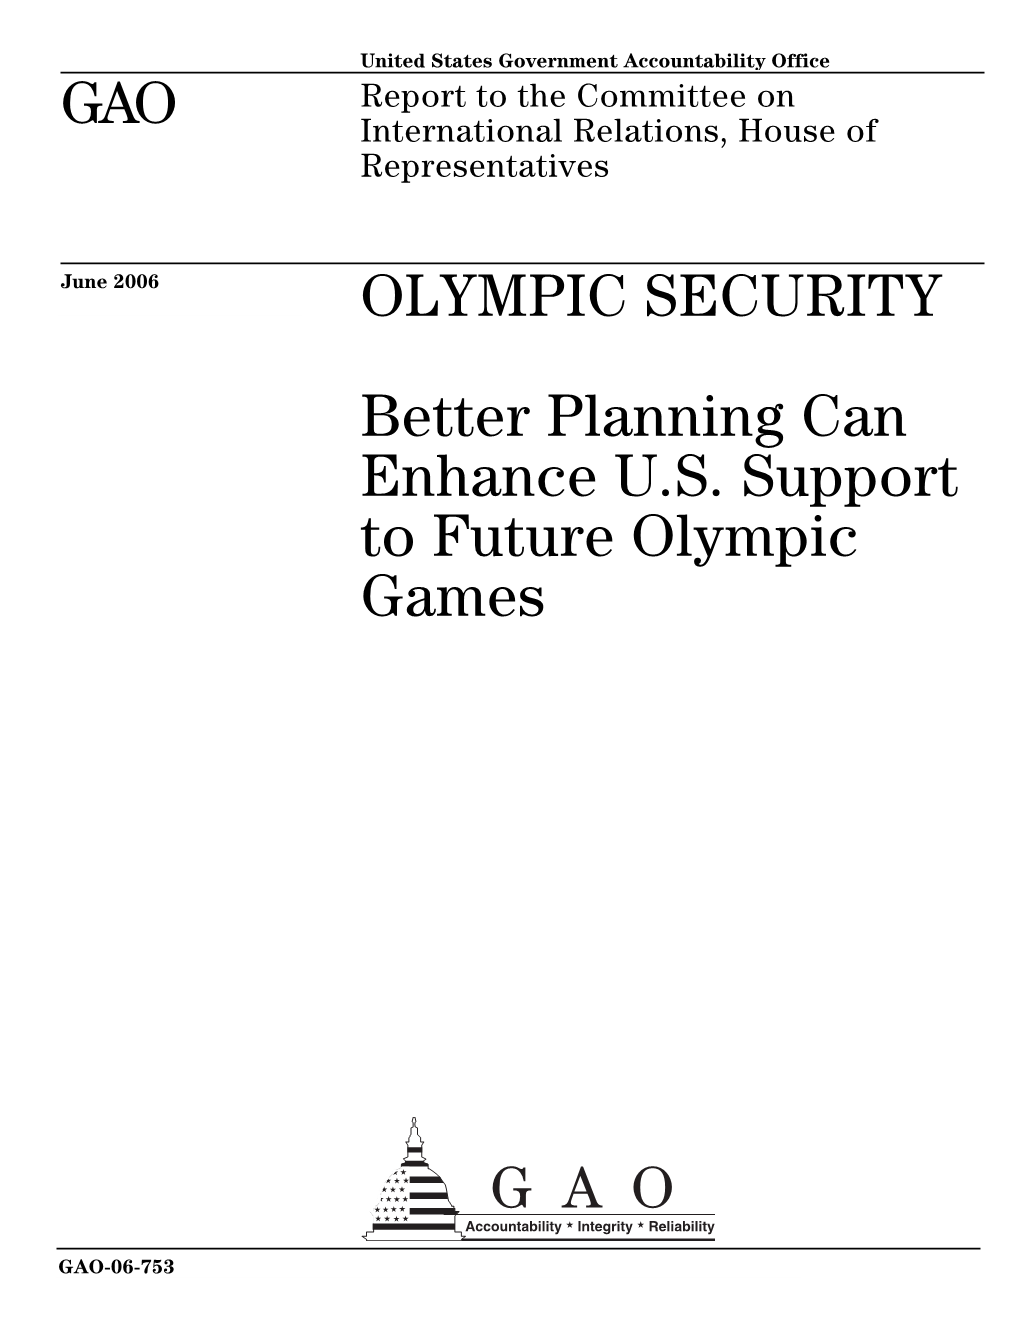 GAO-06-753 Olympic Security: Better Planning Can Enhance U.S